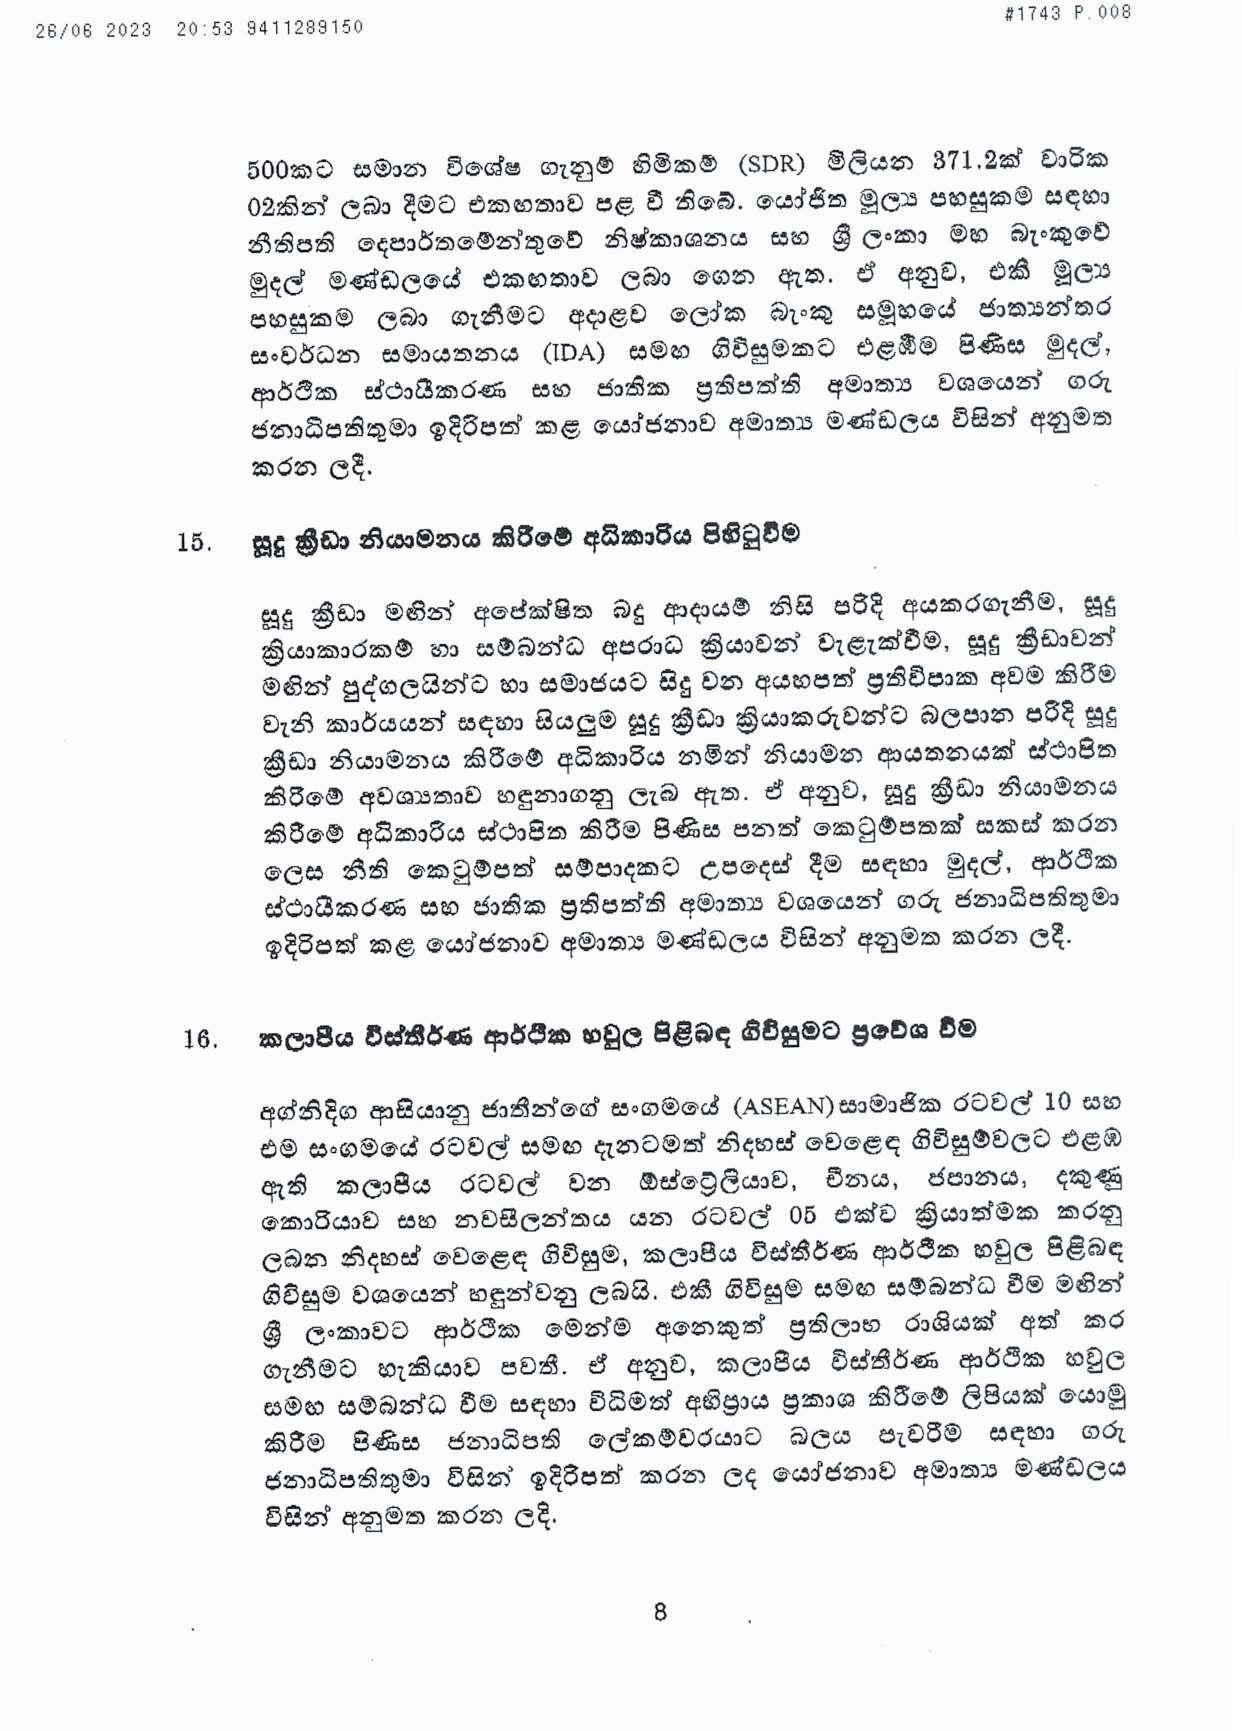 Cabinet Decision on 26.06.2023 page 008